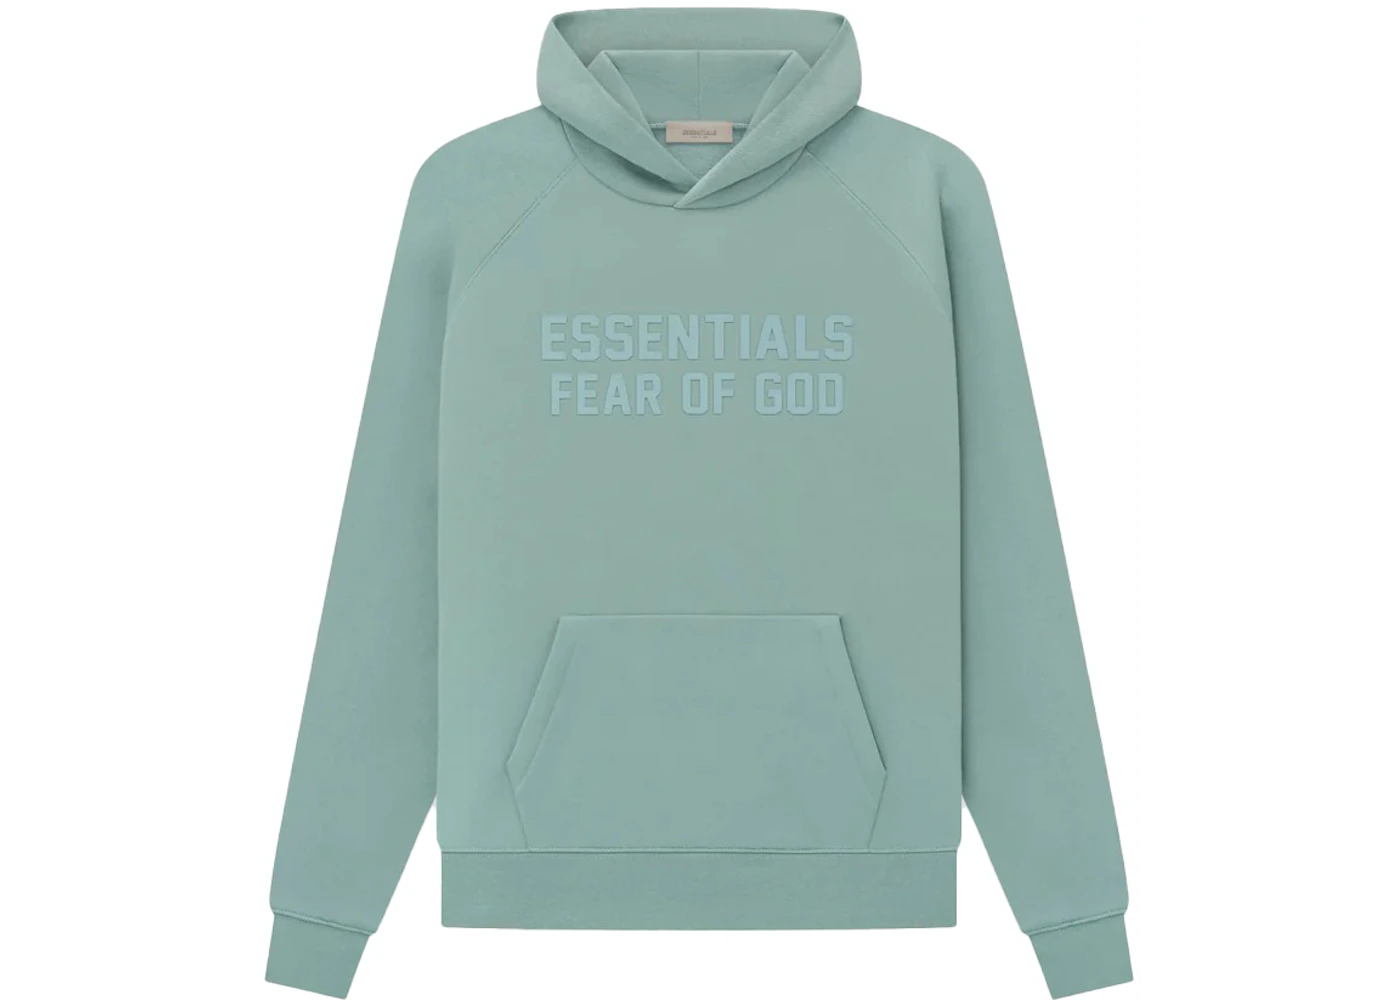 Where To Buy Fear Of God Essentials Hoodie